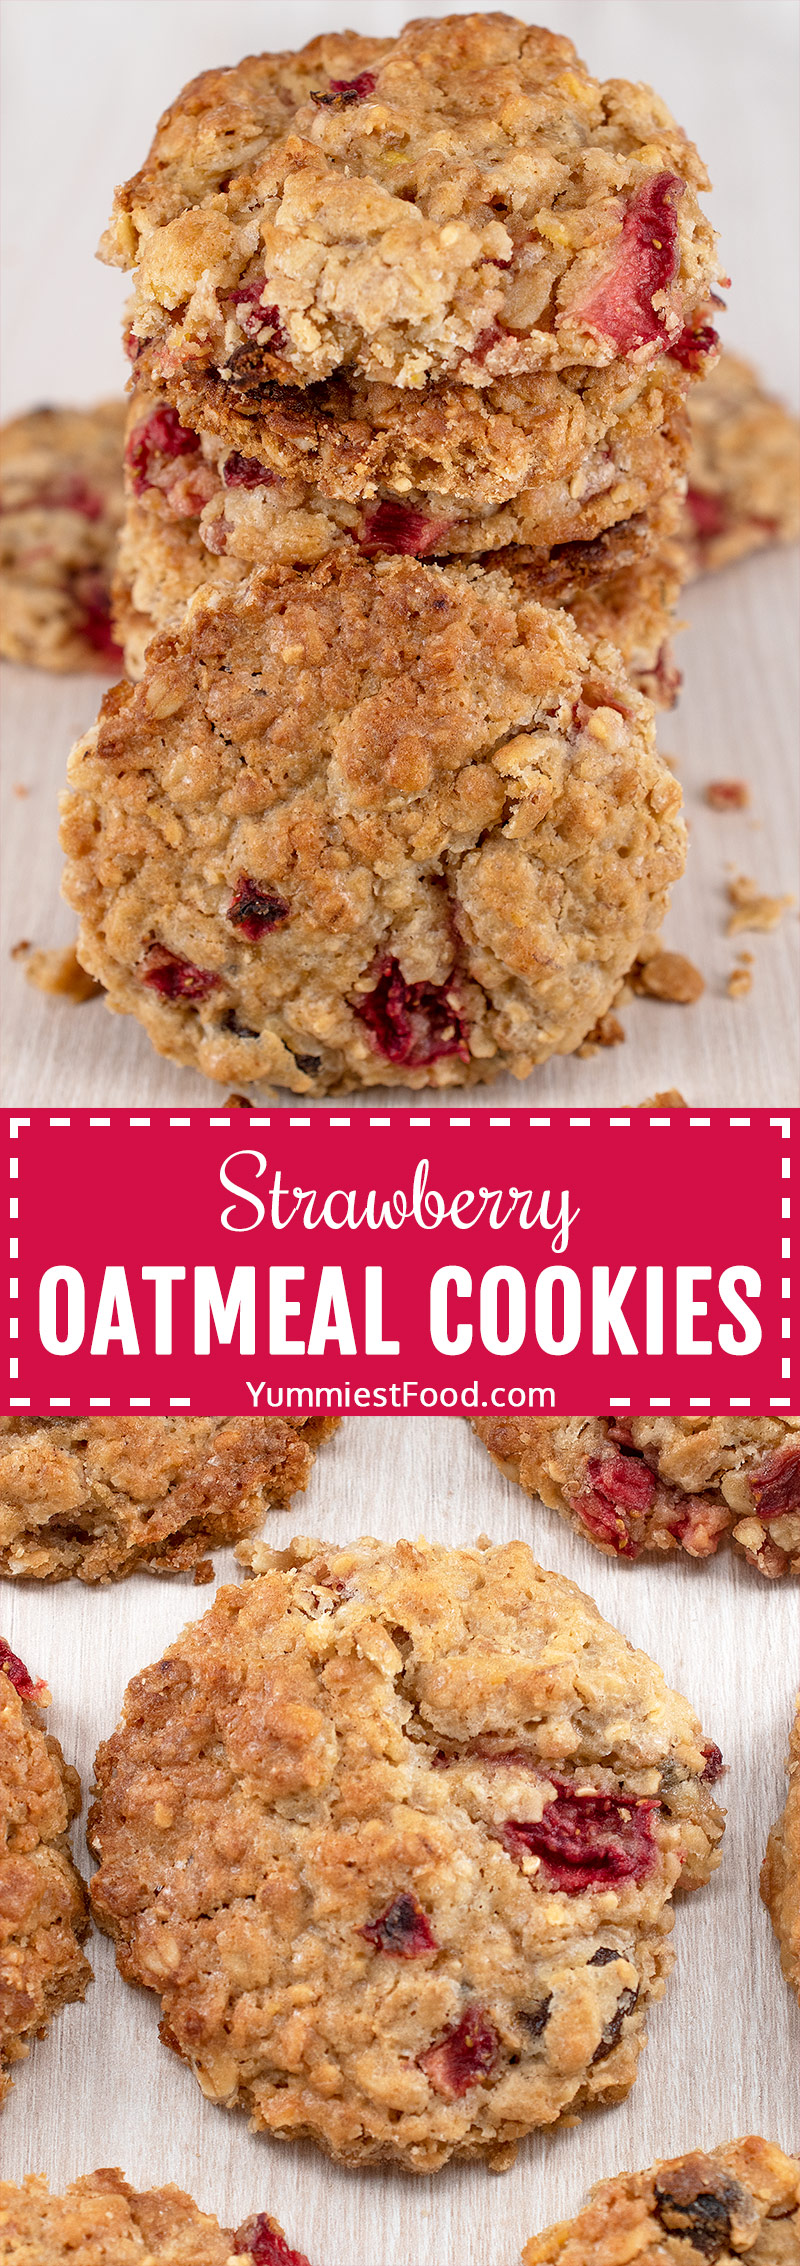 Chewy Strawberry Oatmeal Cookies - suitable for vegans and those who enjoy clean eating